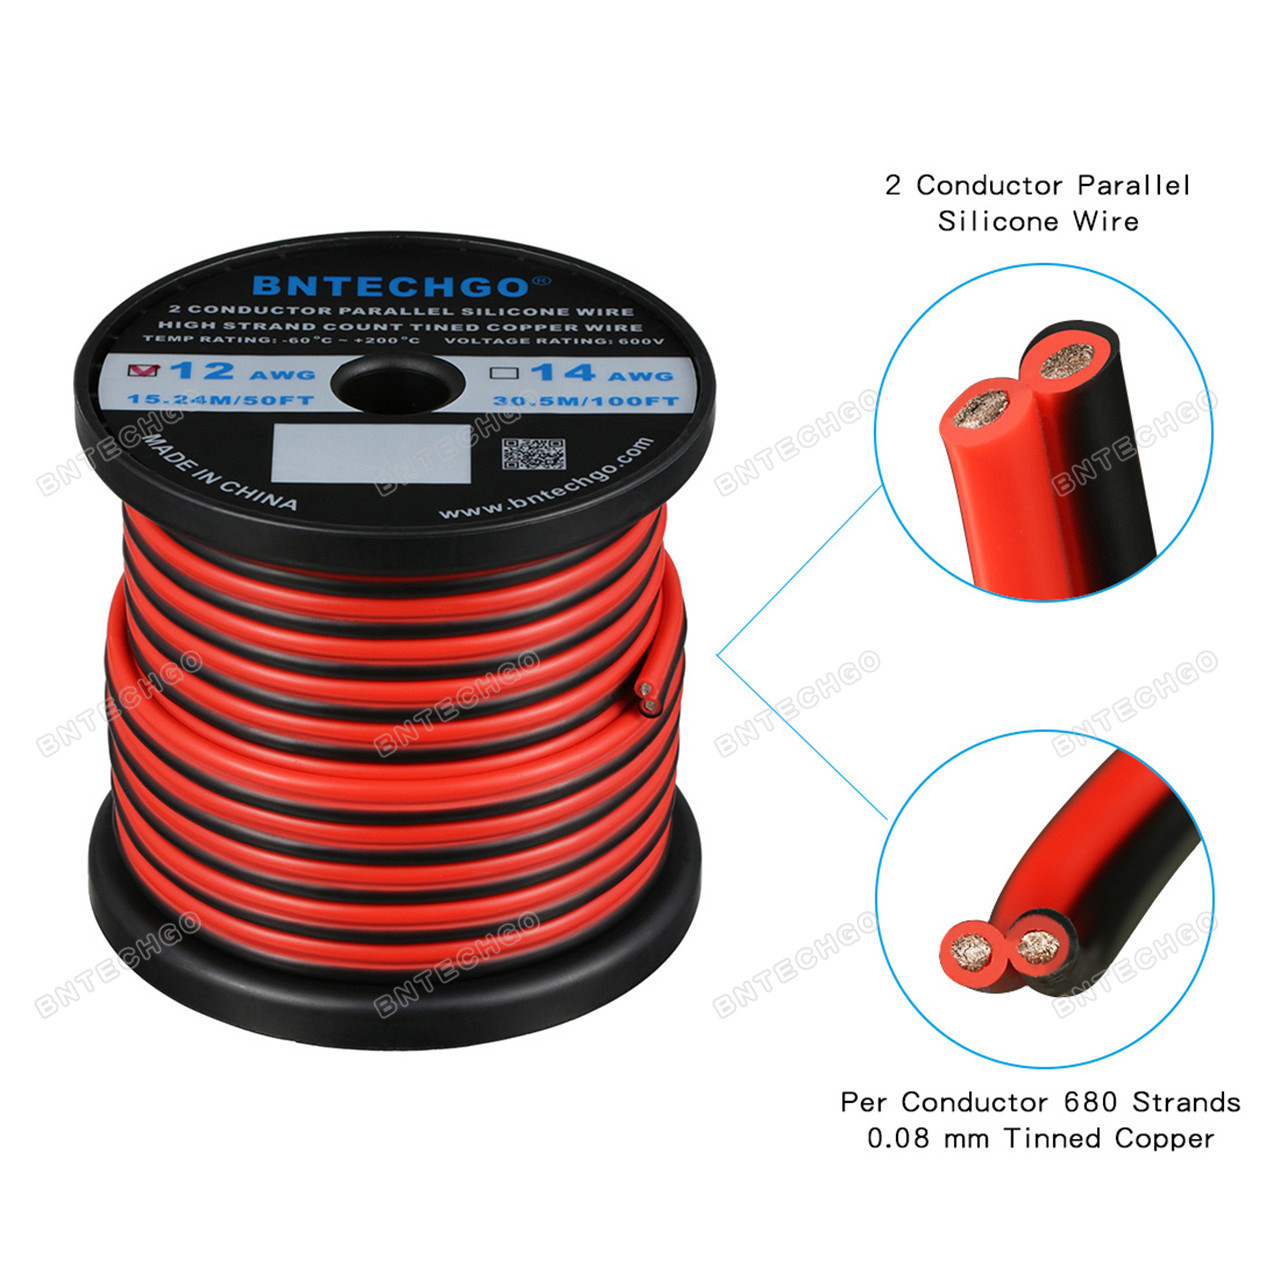 12 gauge flexible Red Black 2 conductor parallel silicone wire